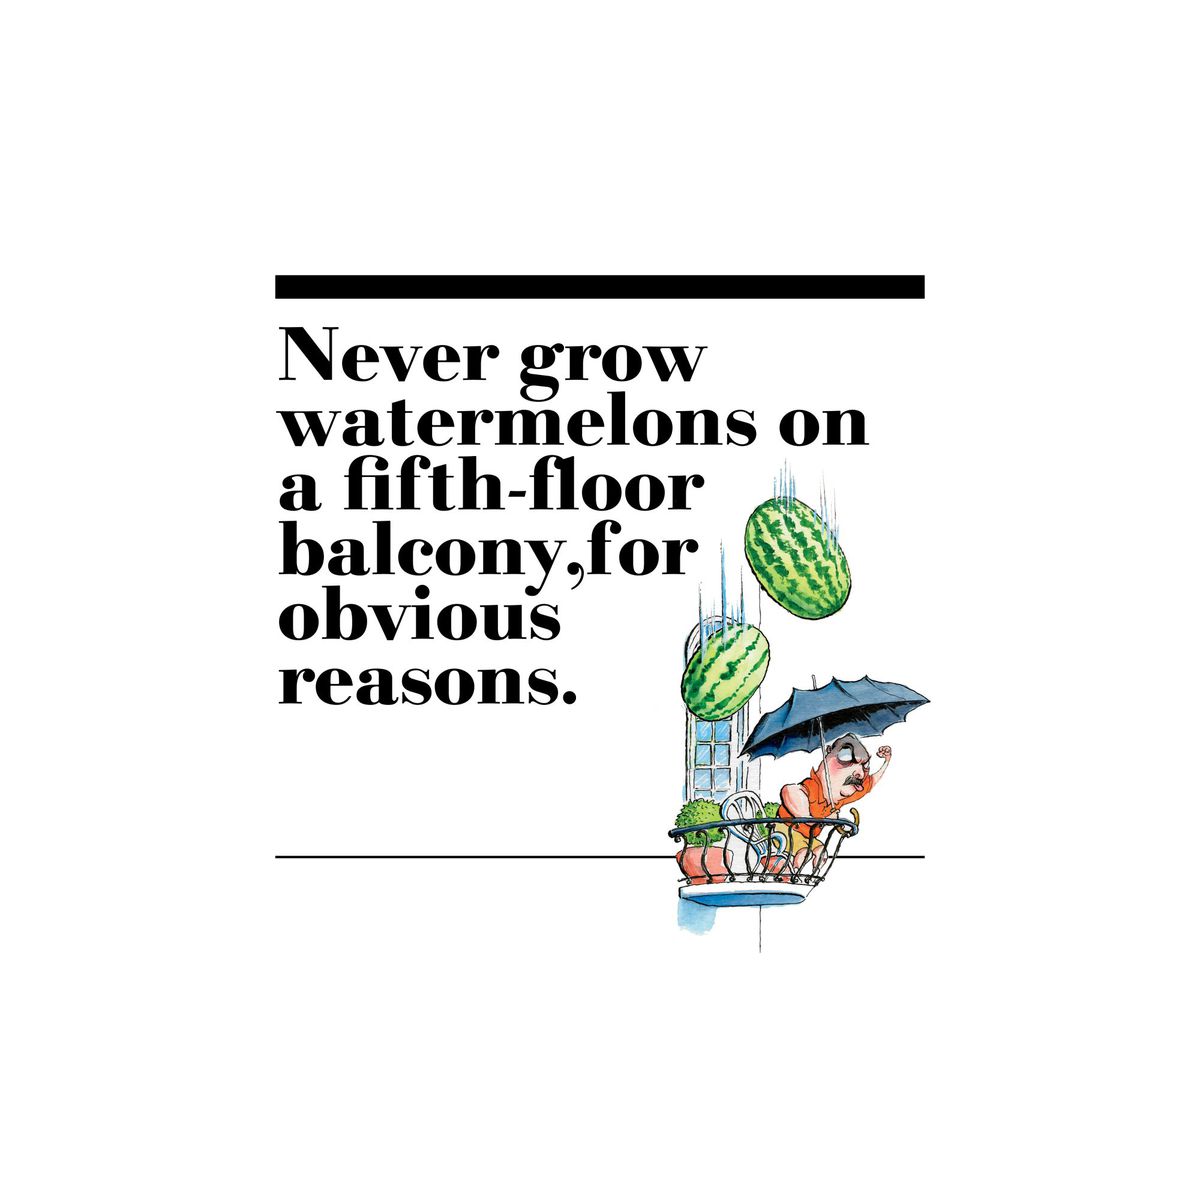 2. Never grow watermelons on a fifth-floor balcony, for obvious reasons.